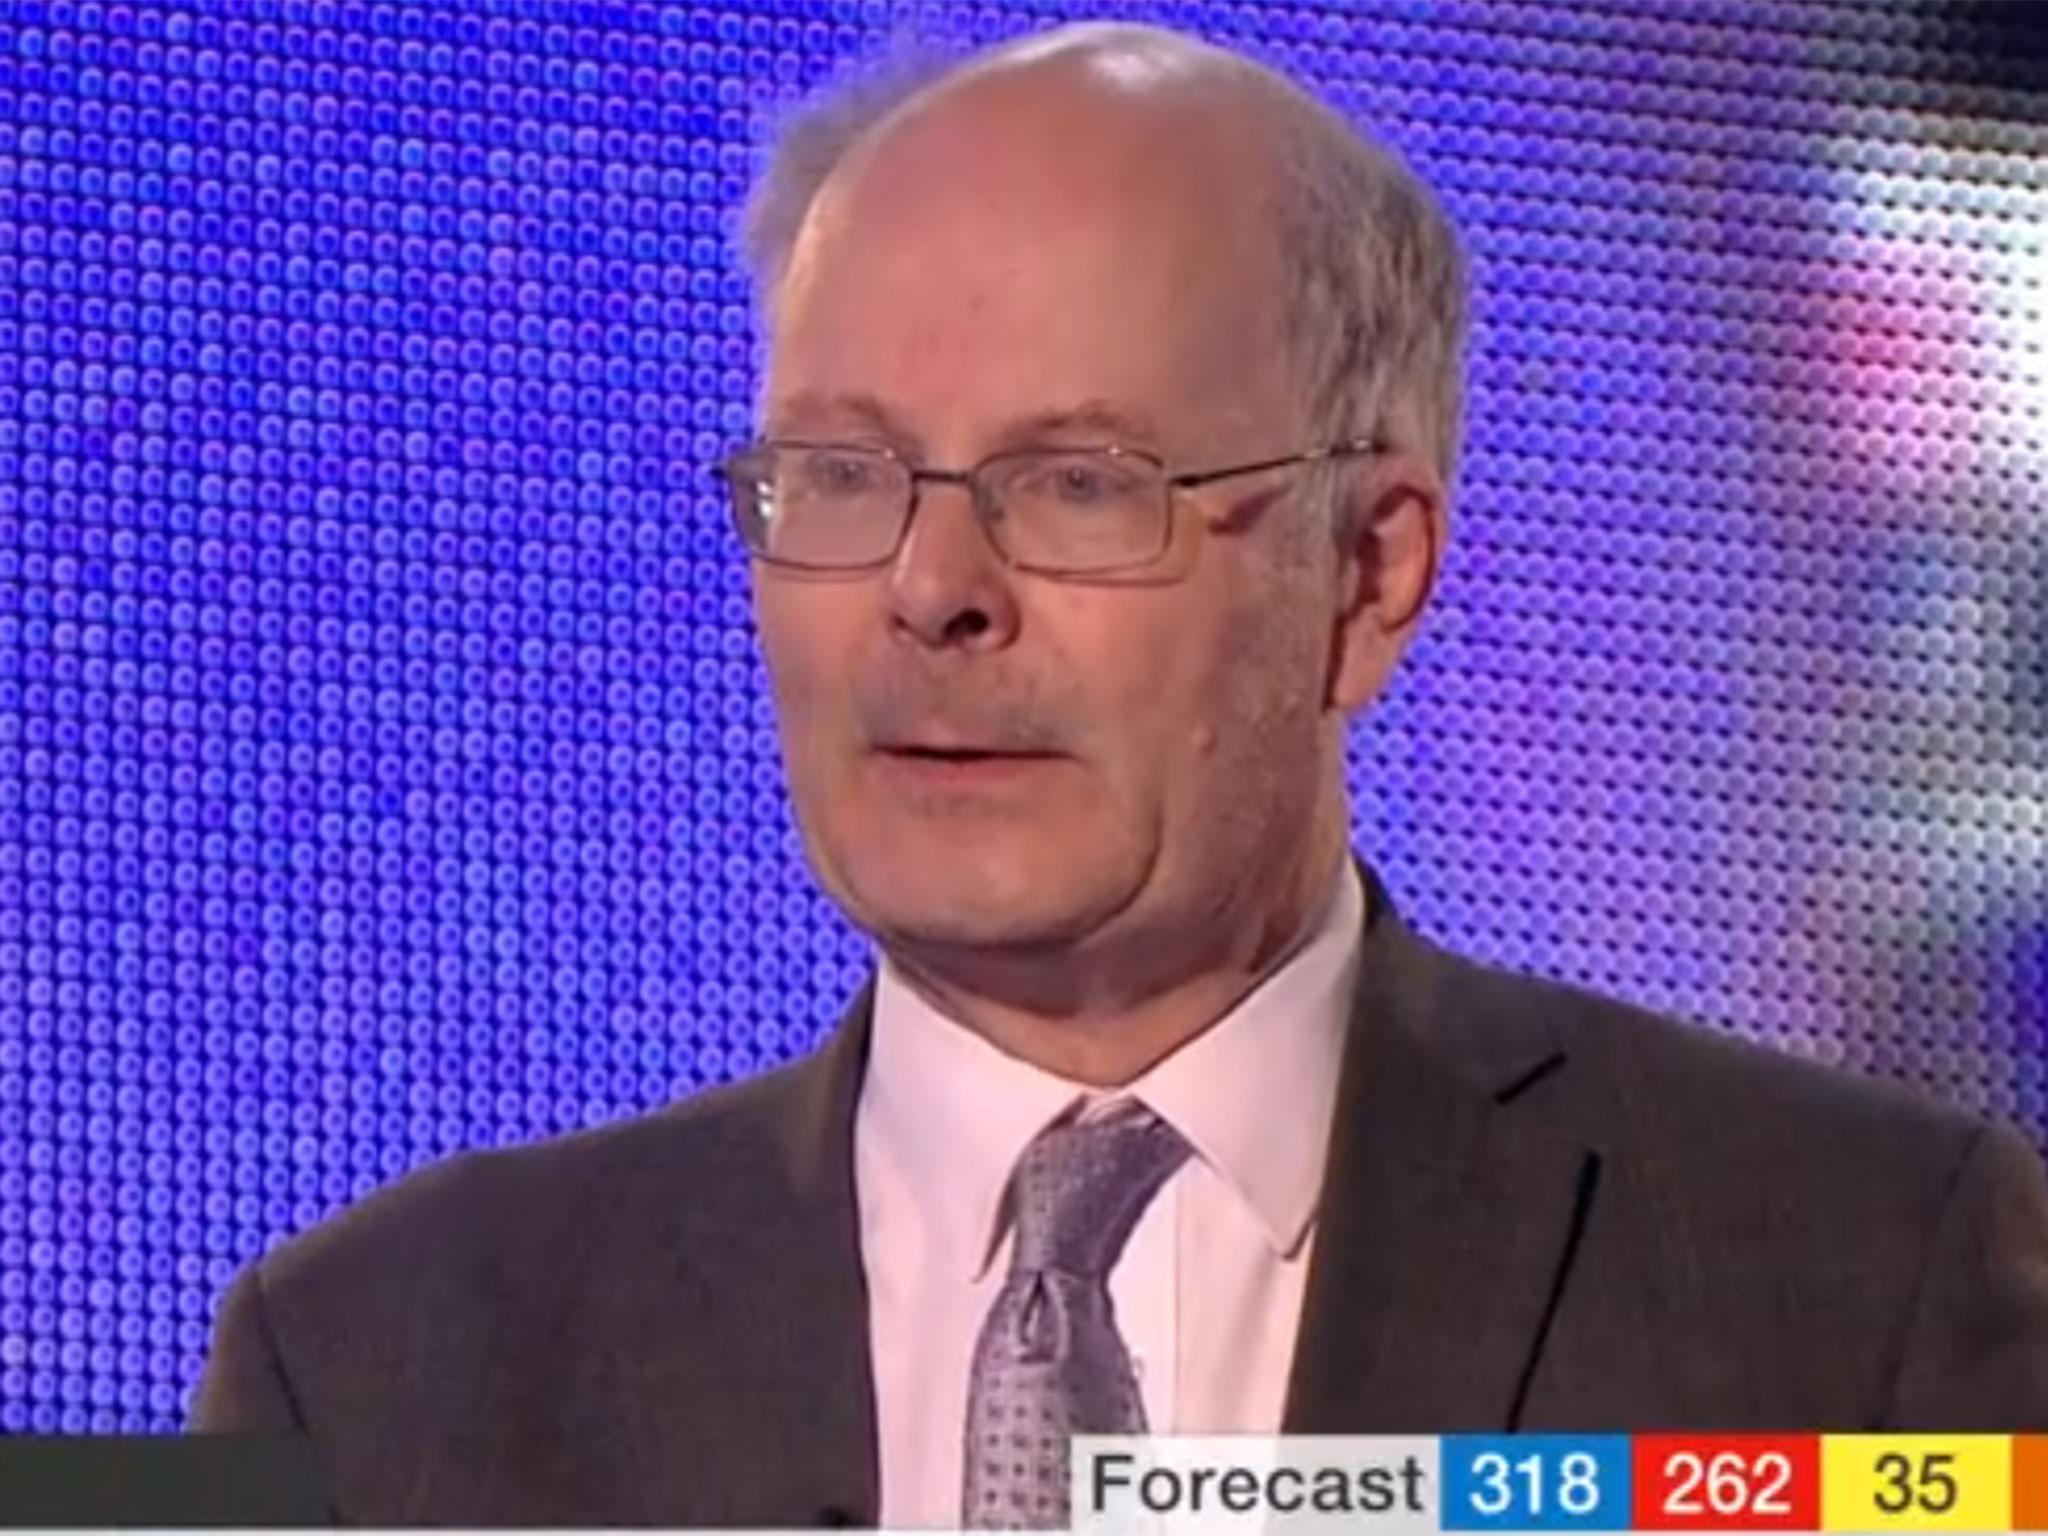 Pollster Sir John Curtice has been knighted in the New Years Honours